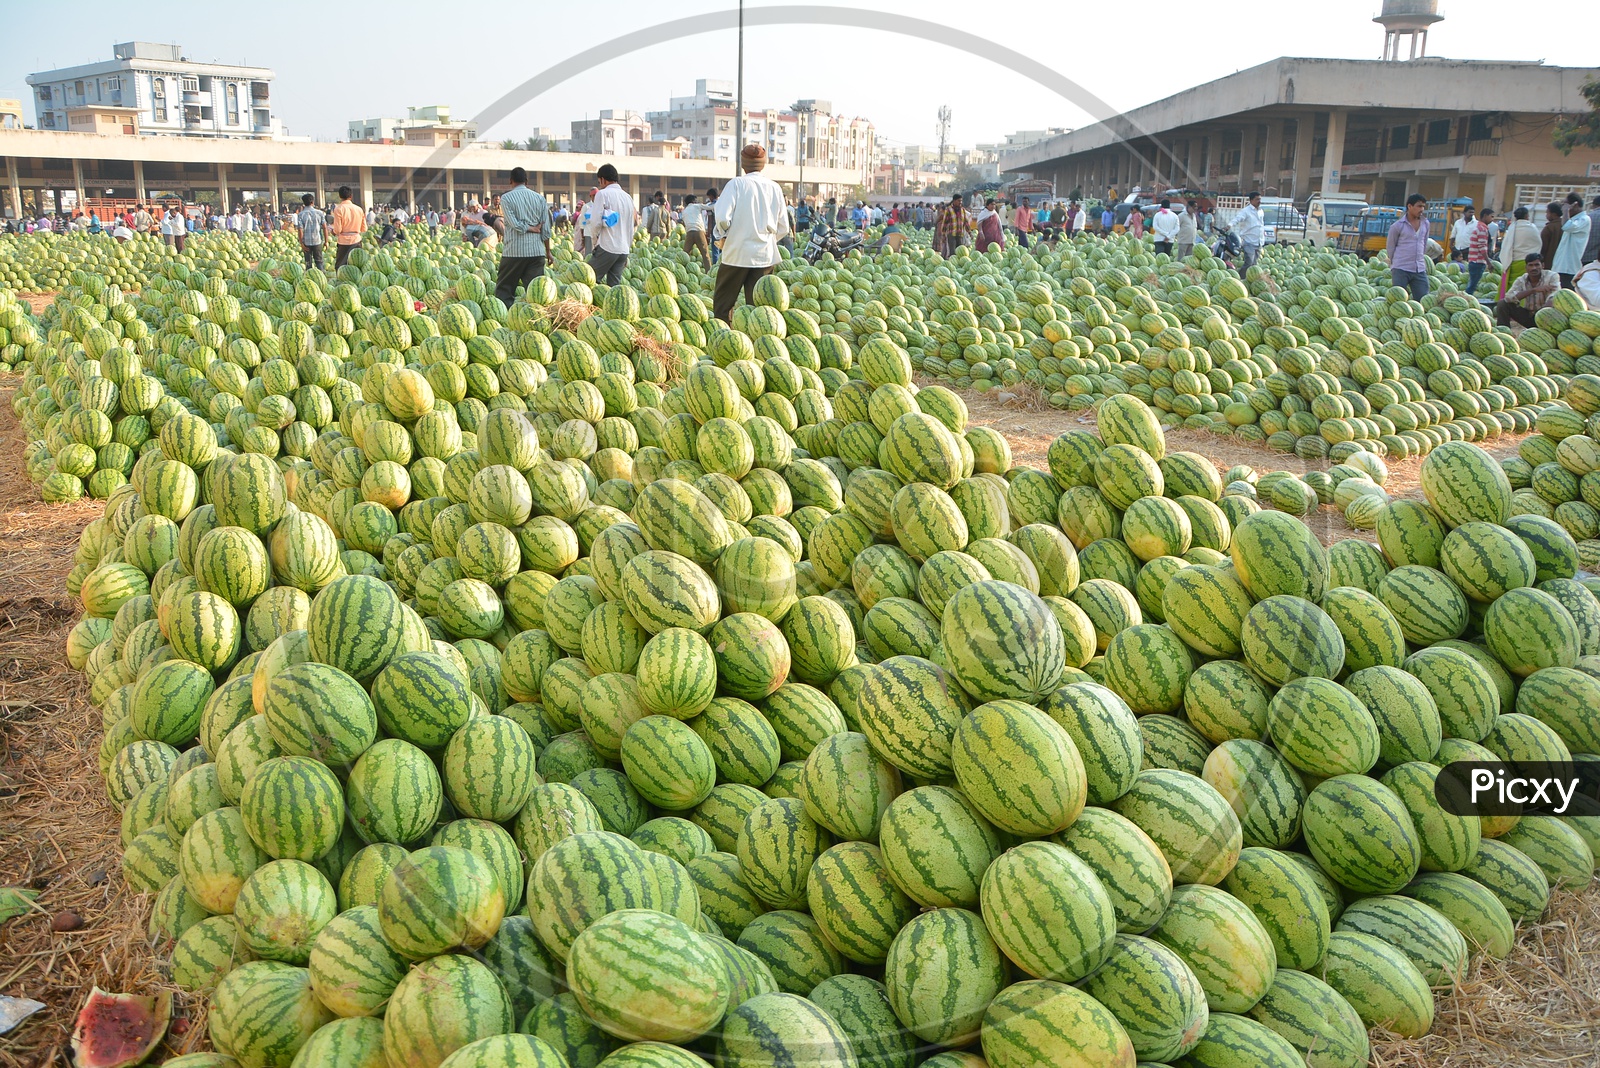 Fruit Market With Piles Of Watermelons in Kothapeta , Hyderabad